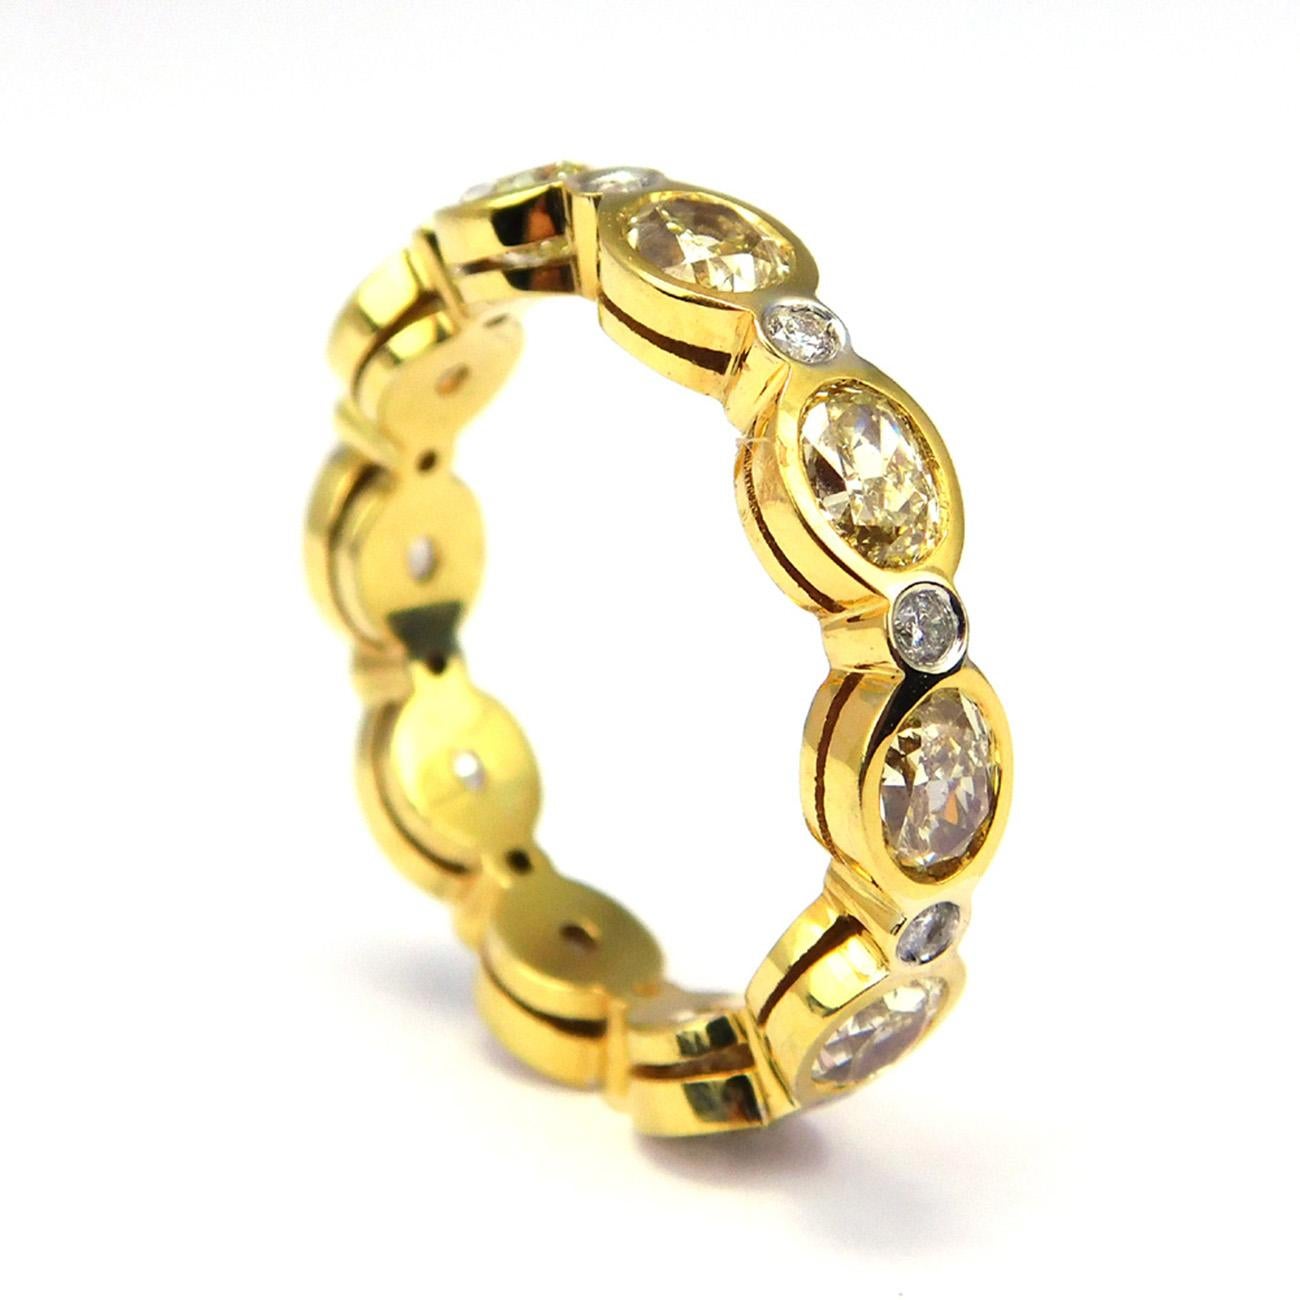 Eternity band in 18K yellow gold with bezel set alternating round and fancy yellow oval cut diamonds. D3.29ct.t.w.